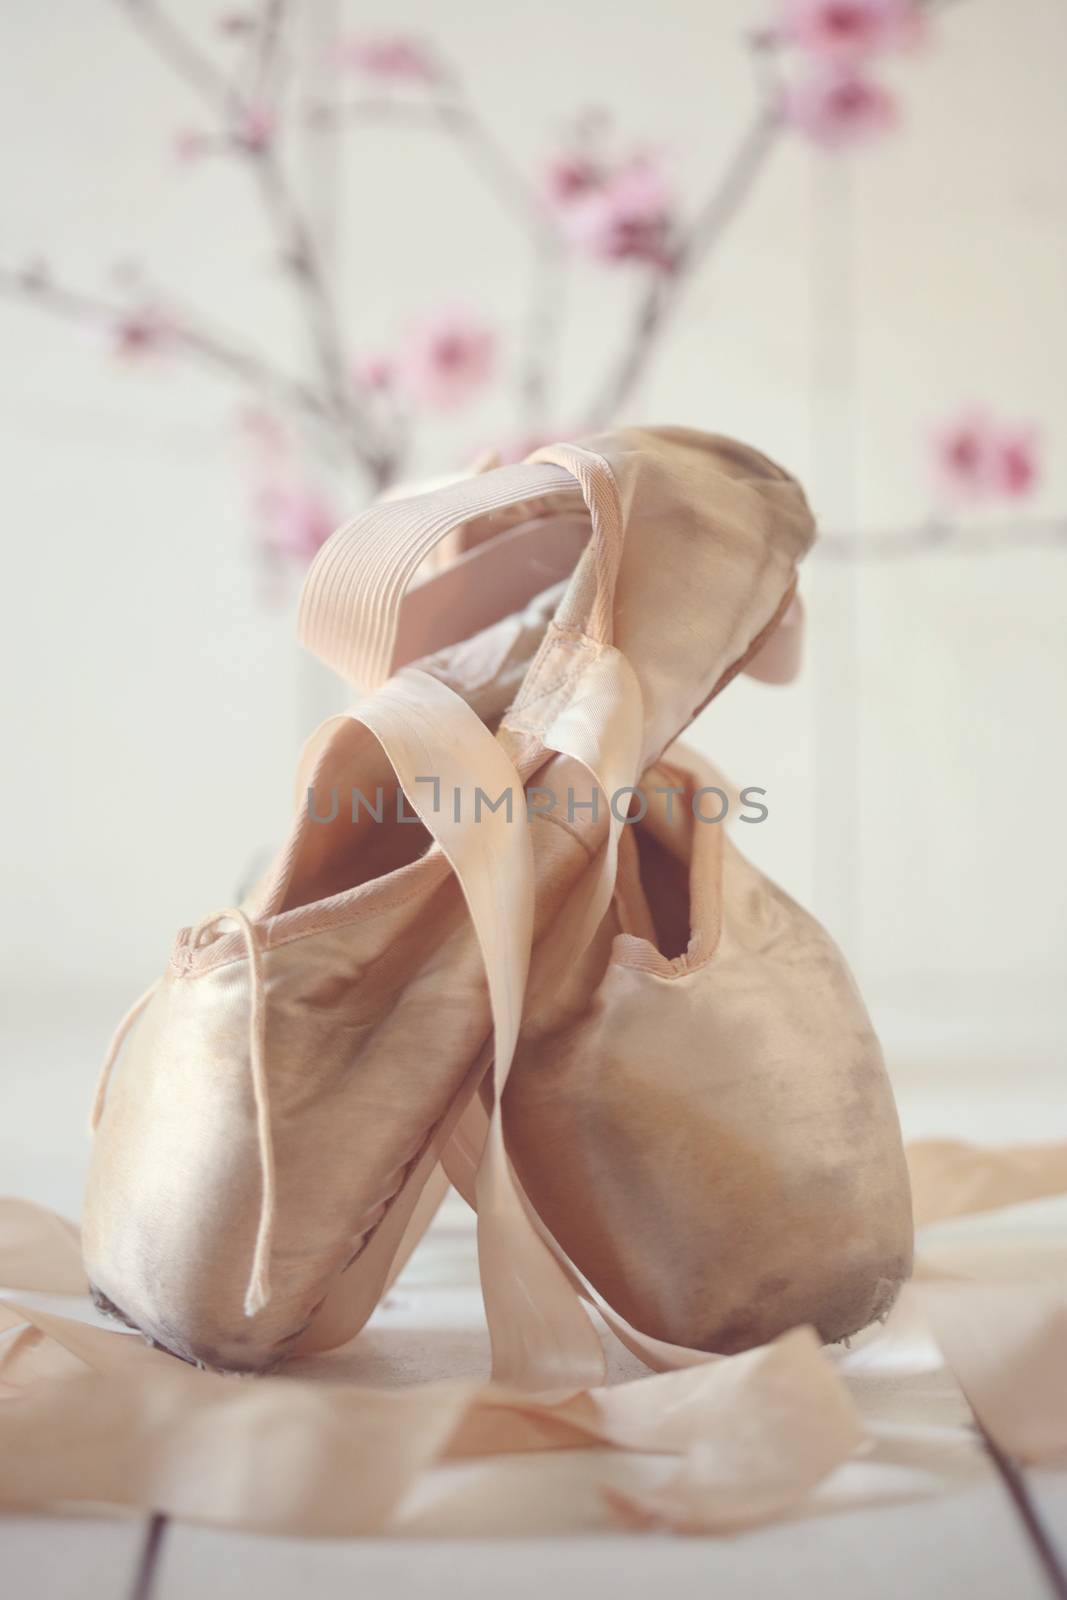 Posed Pointe Shoes in Natural Light  by tobkatrina